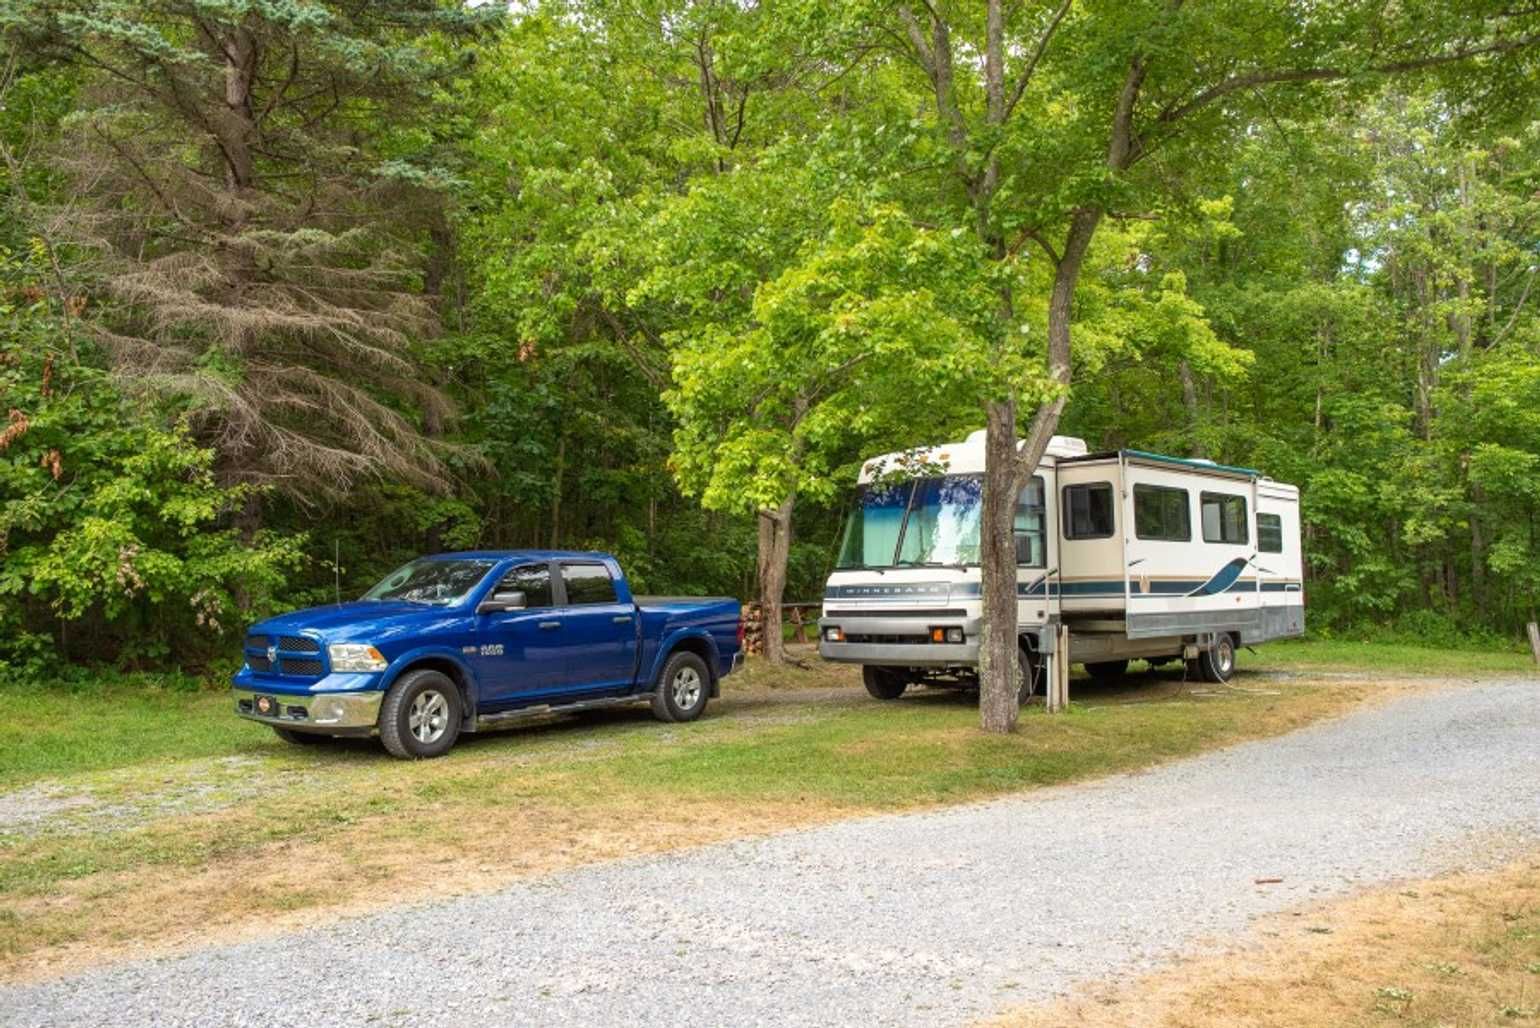 A blue truck is parked next to a rv in a campground.